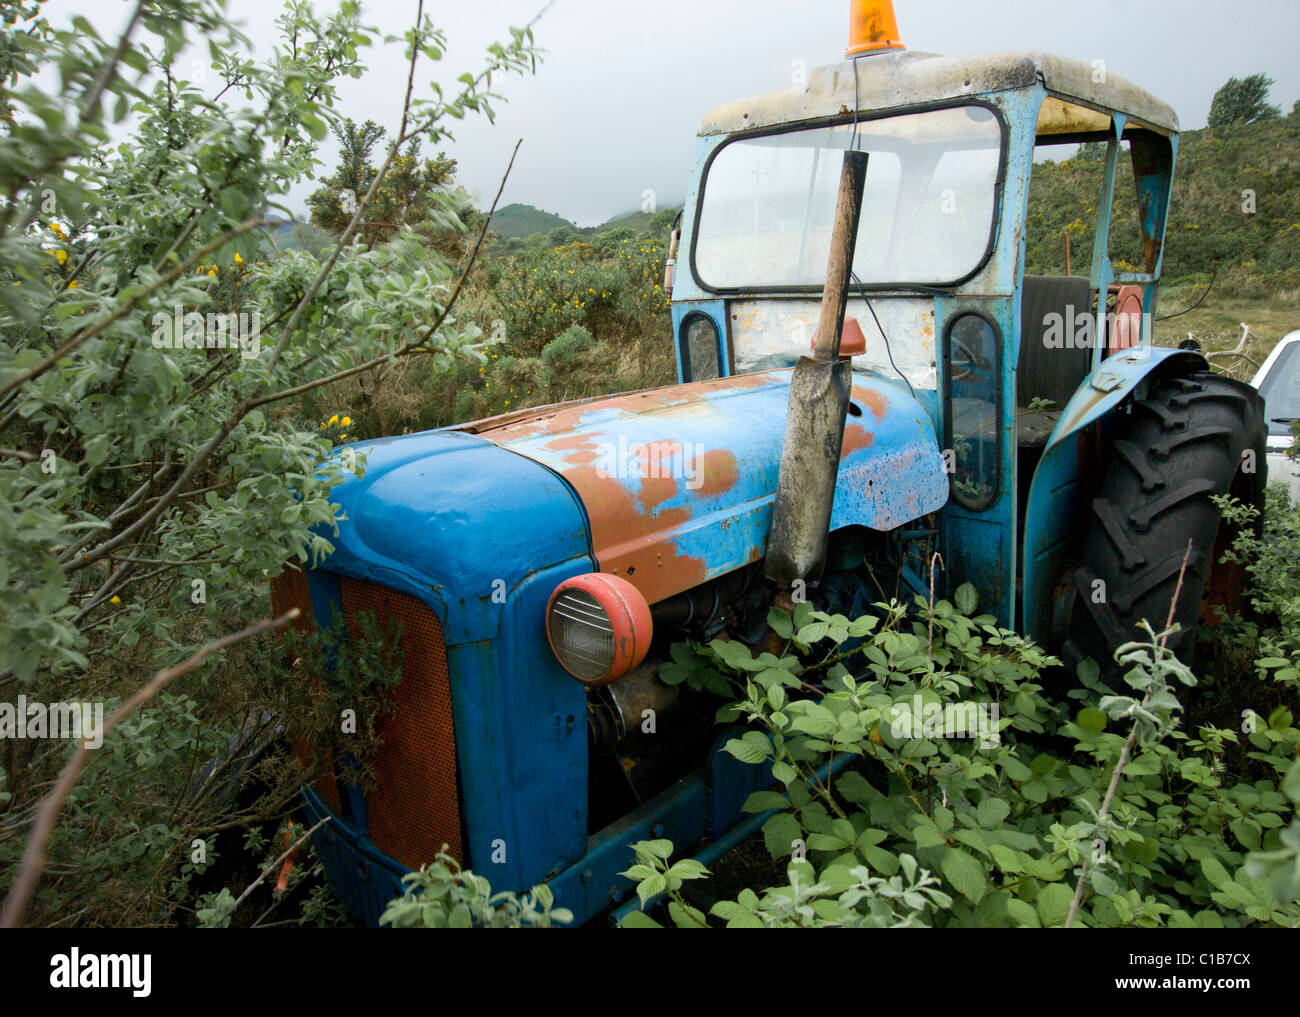 Old blue tractor in undergrowth Stock Photo